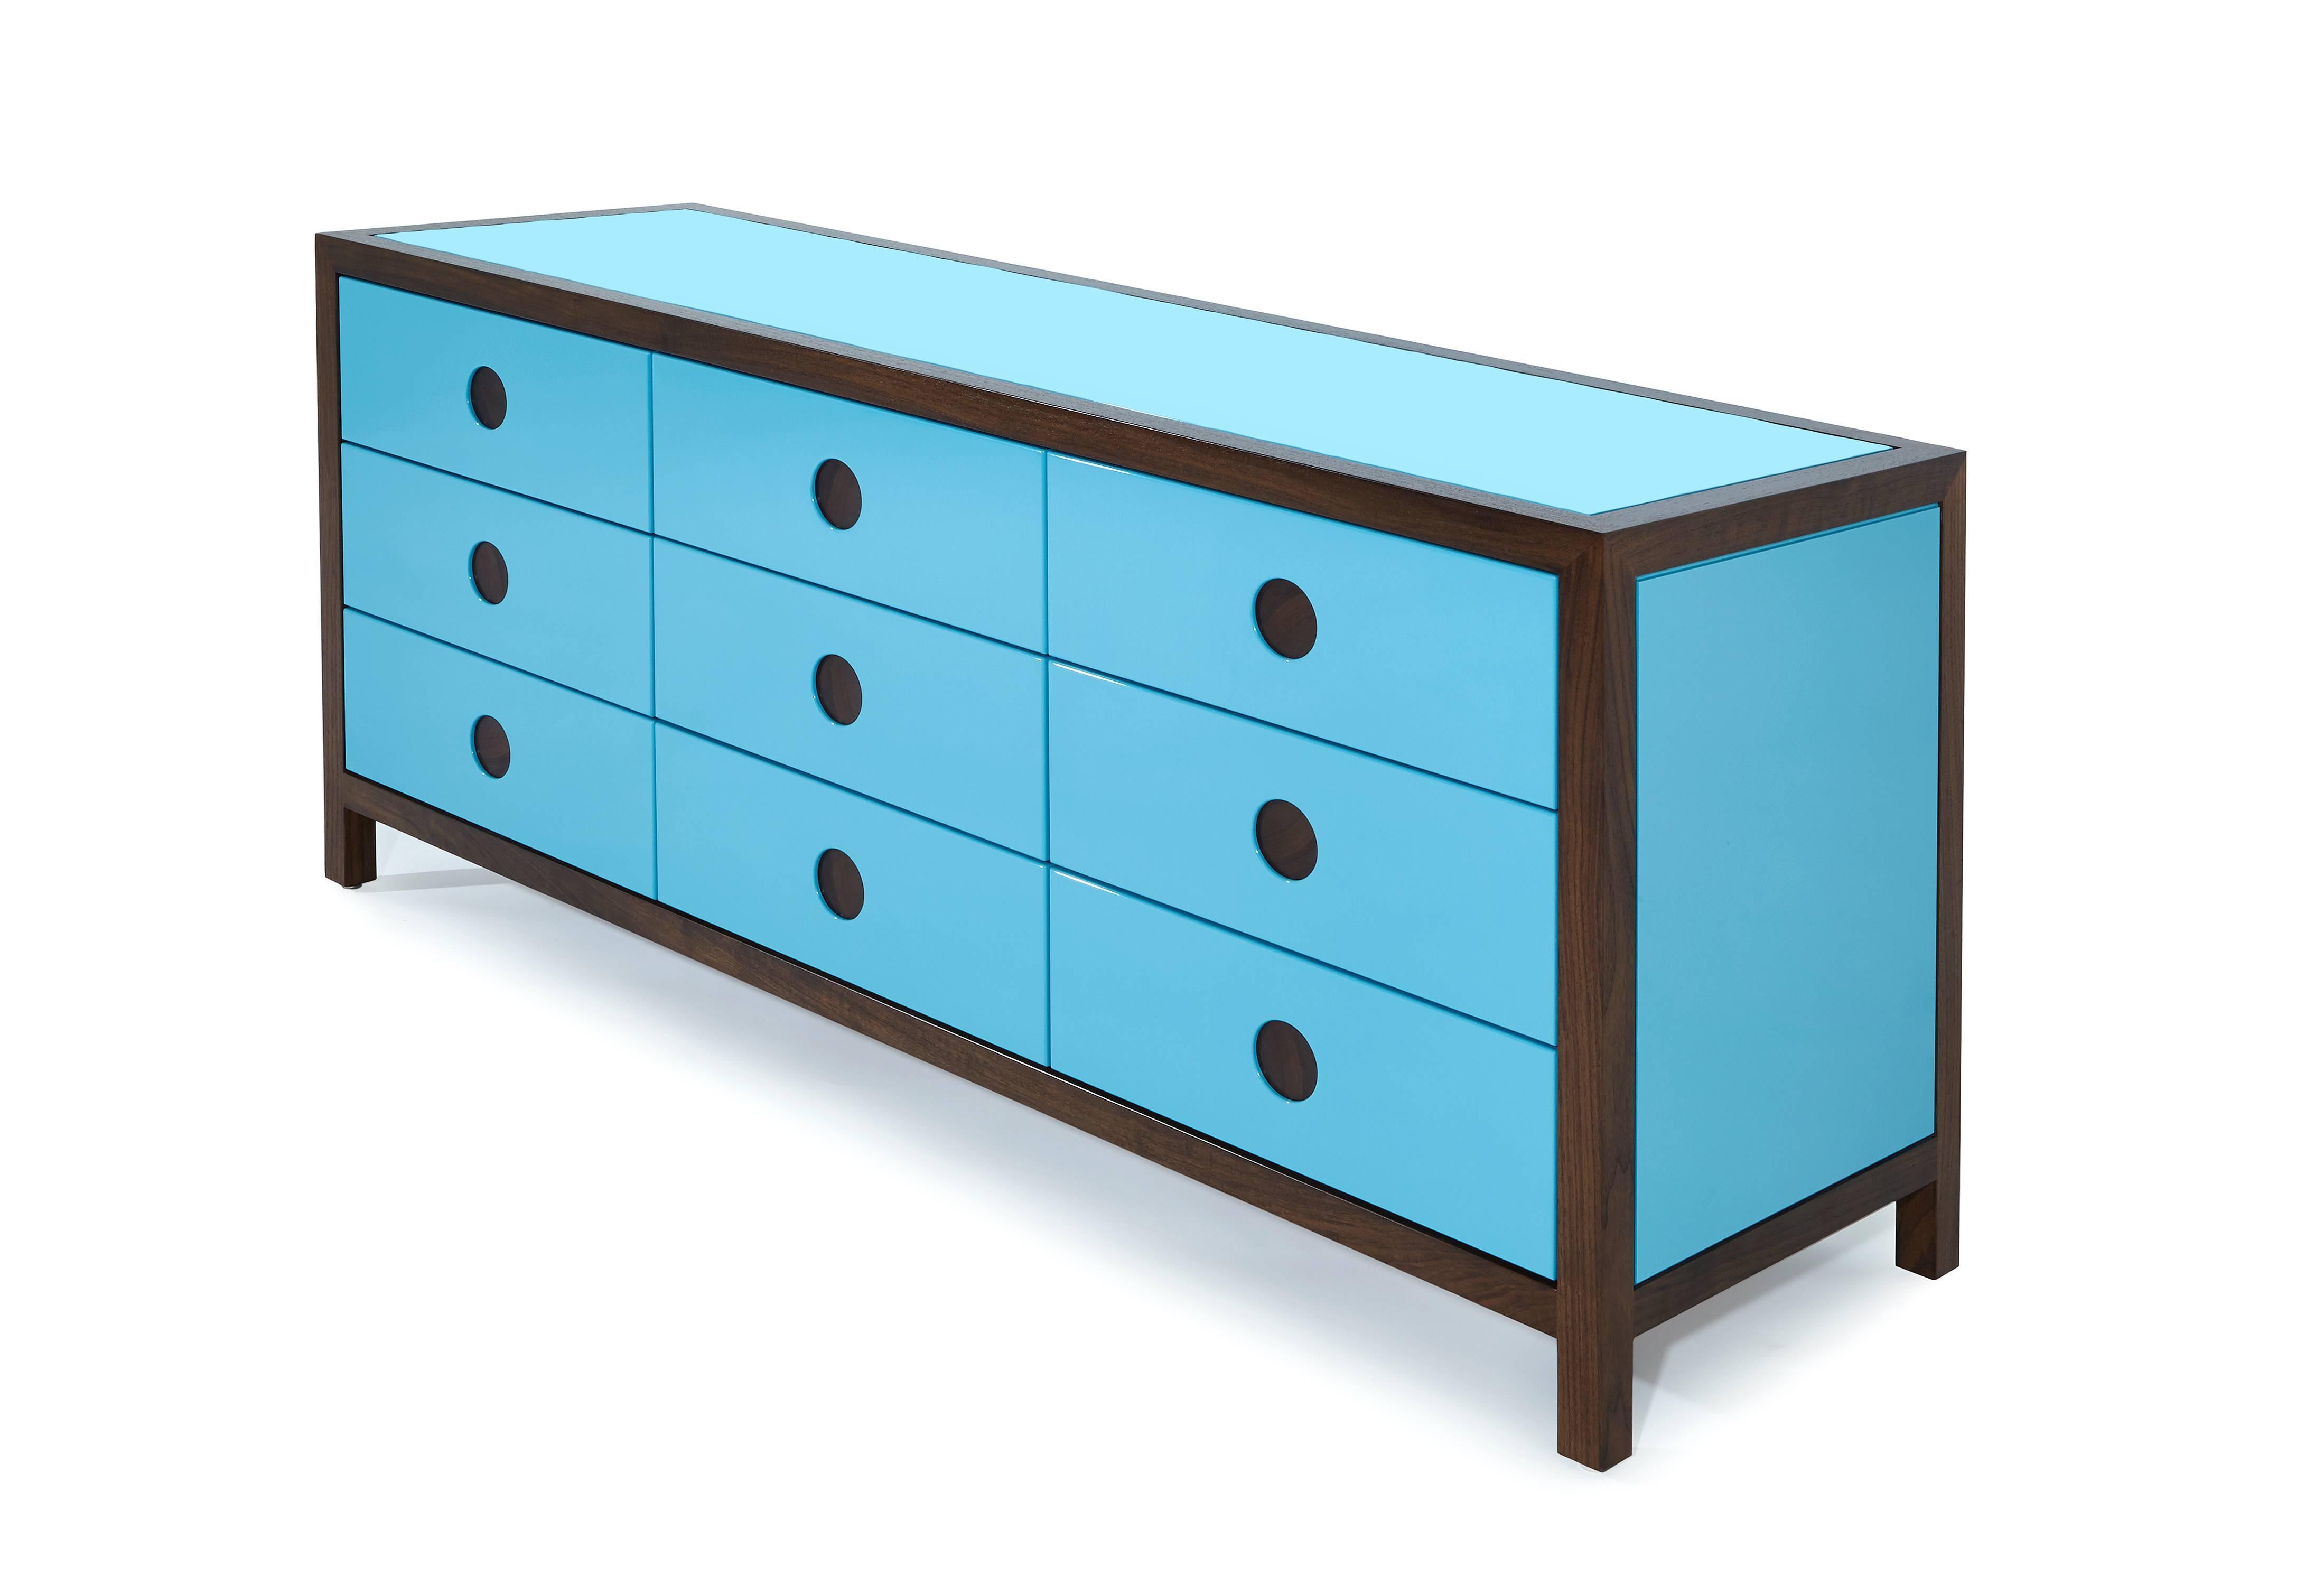 Mixing midcentury shapes with glossy lacquer, richly stained walnut, and inset circular walnut details, this low dresser with six push to open drawers is the perfect mix of function and high style.